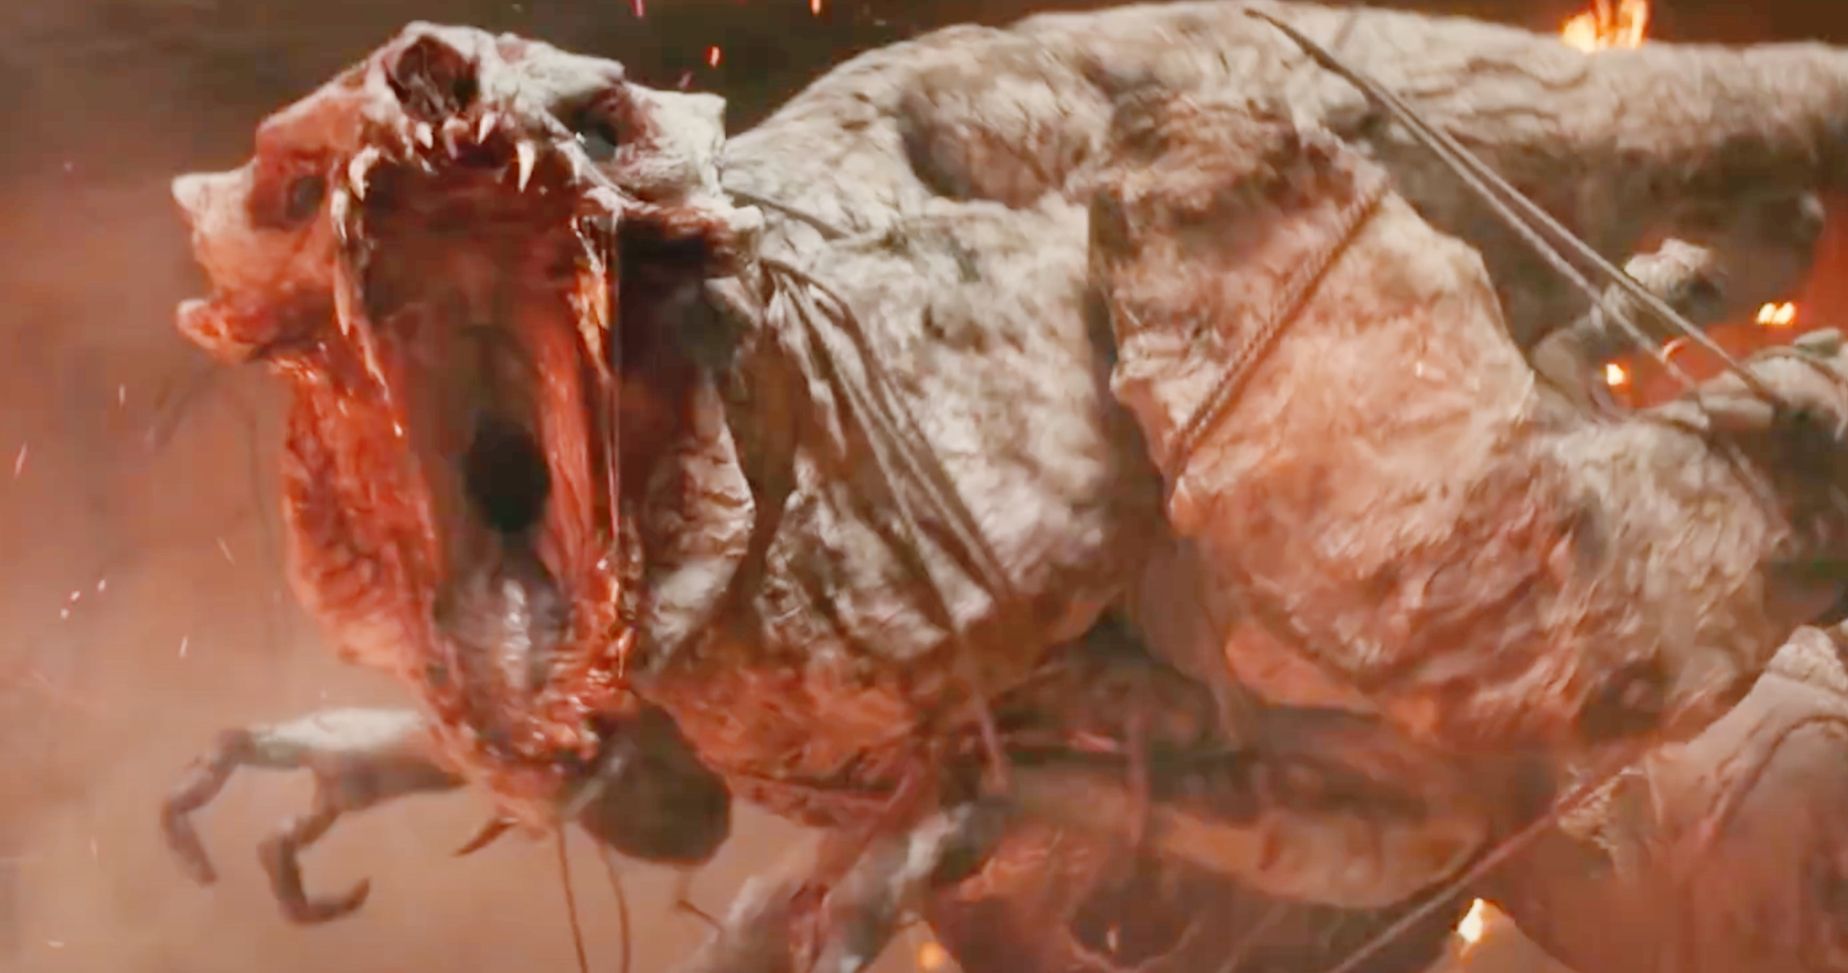 The Tomorrow War Final Trailer Unleashes Human-Eating Aliens in Brutal Attack on Earth